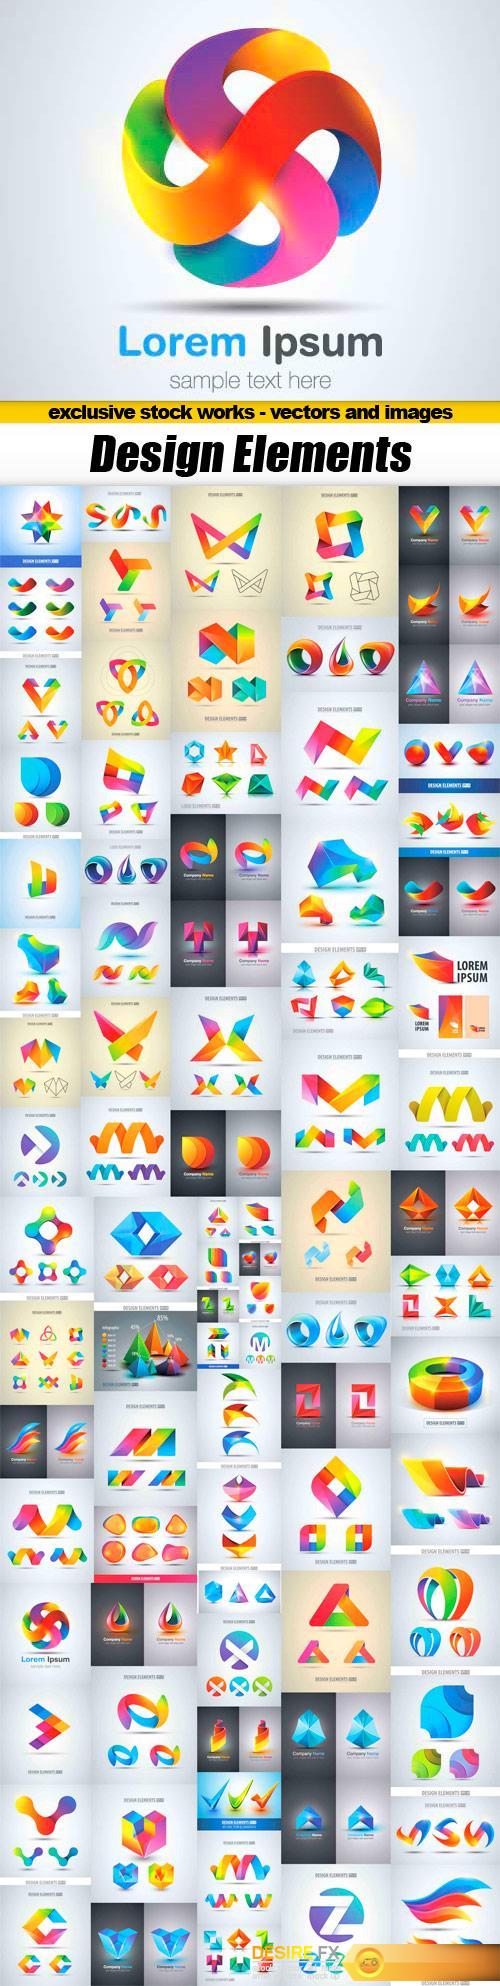 High Quality Vector Design Elements and Logos - 85x EPS